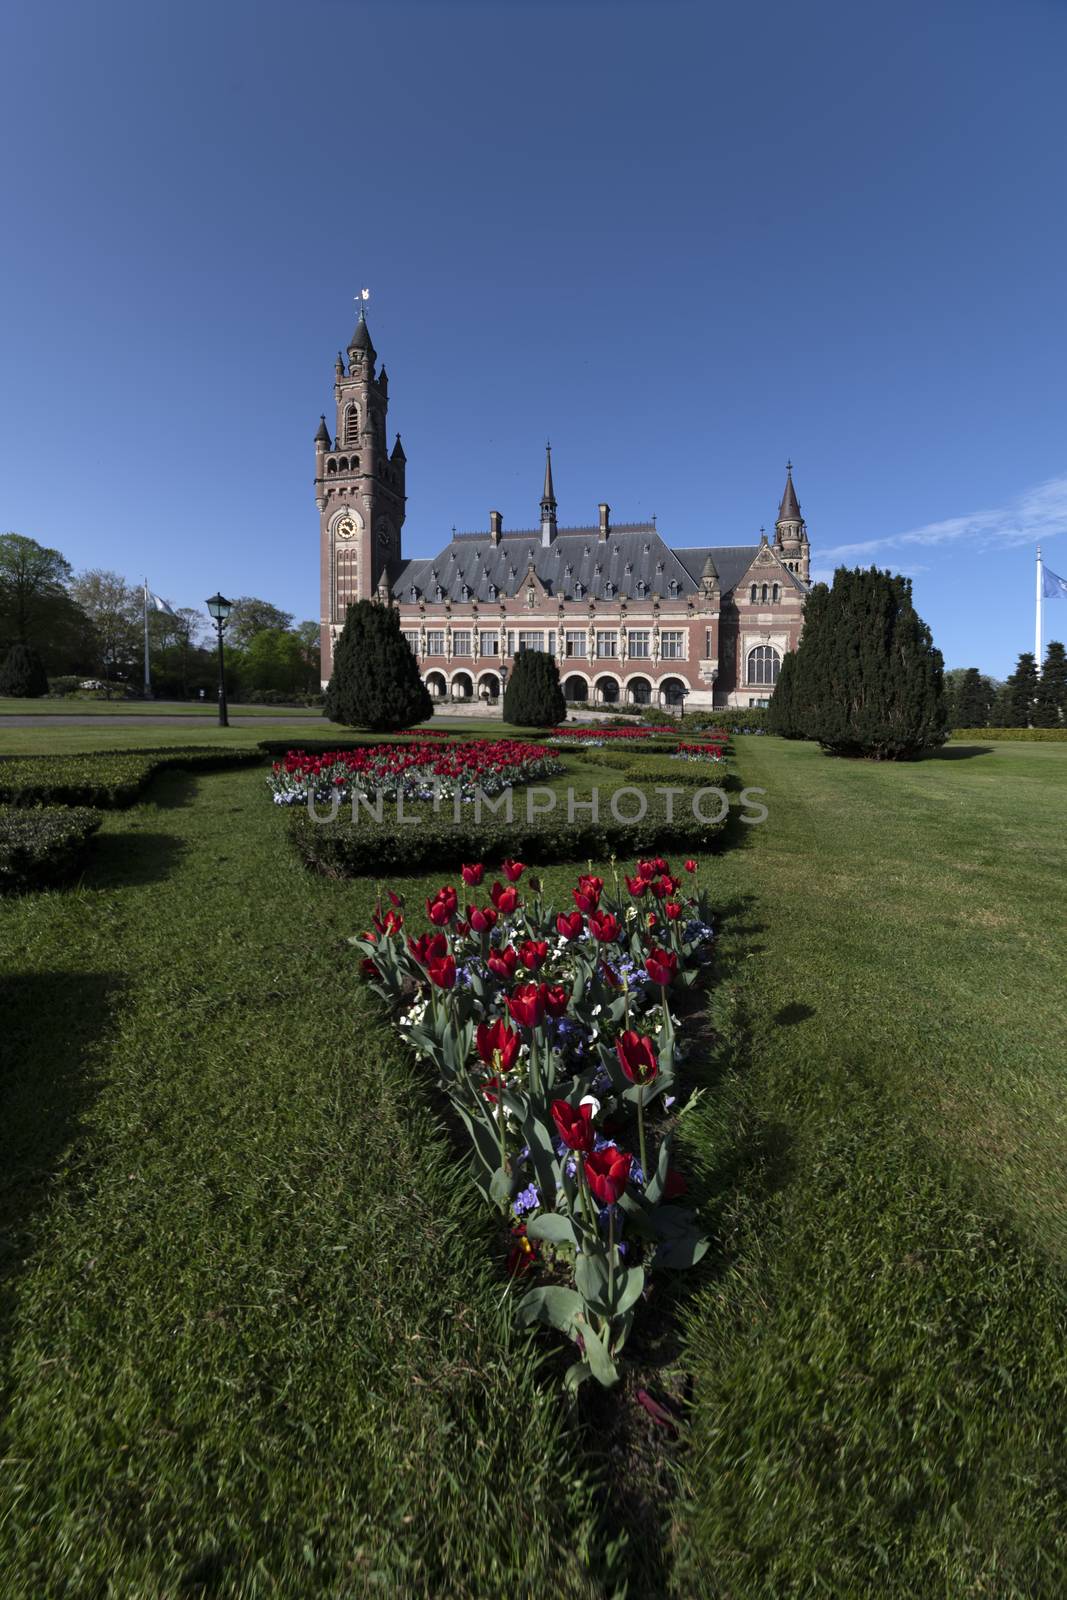 THE HAGUE, 24 April 2019 - Sunrise at the Peace Palace, seat of the International Court of Justice, view from the peaceful garden with read tulip flowers around the building  by ankorlight